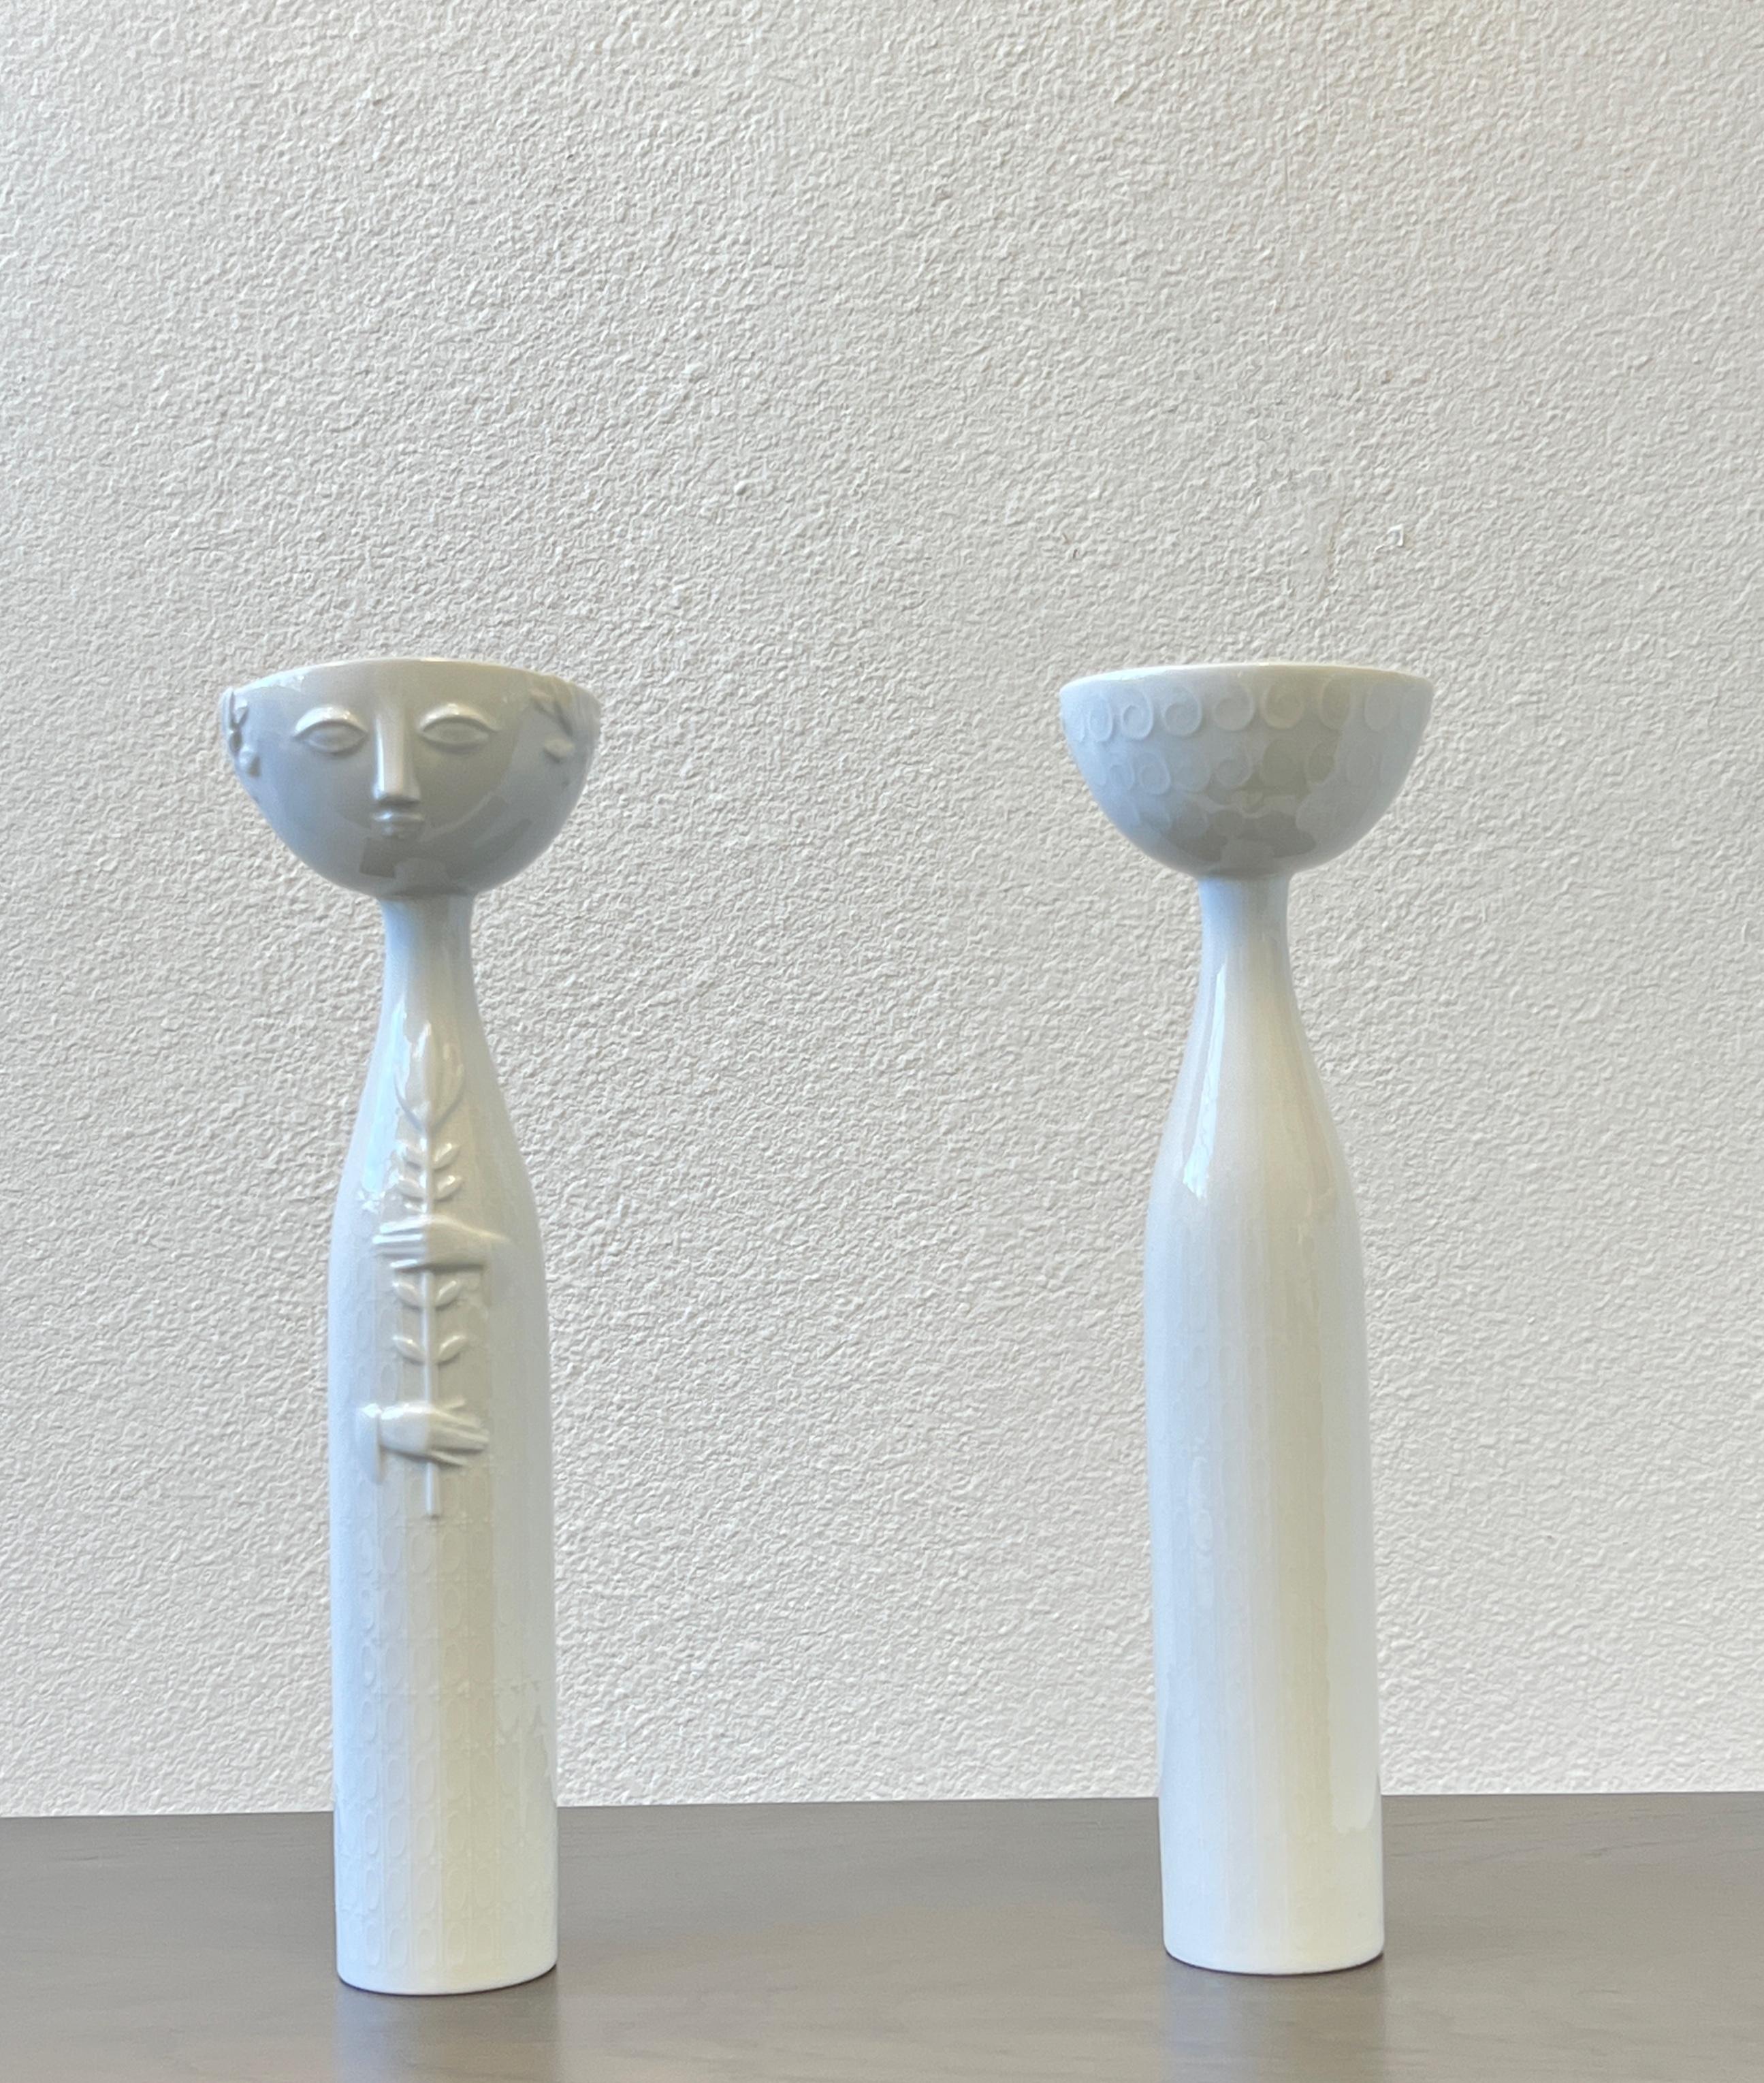 A beautiful pair of 1970’s white porcelain Eva candle holders or vases by renowned Danish Painter Bjorn Wiinblad for Rosenthal Studio Linie  Germany. 
Both are signed.
Measurements: 14.5” High, 4.25” Wide, 4” Deep. 